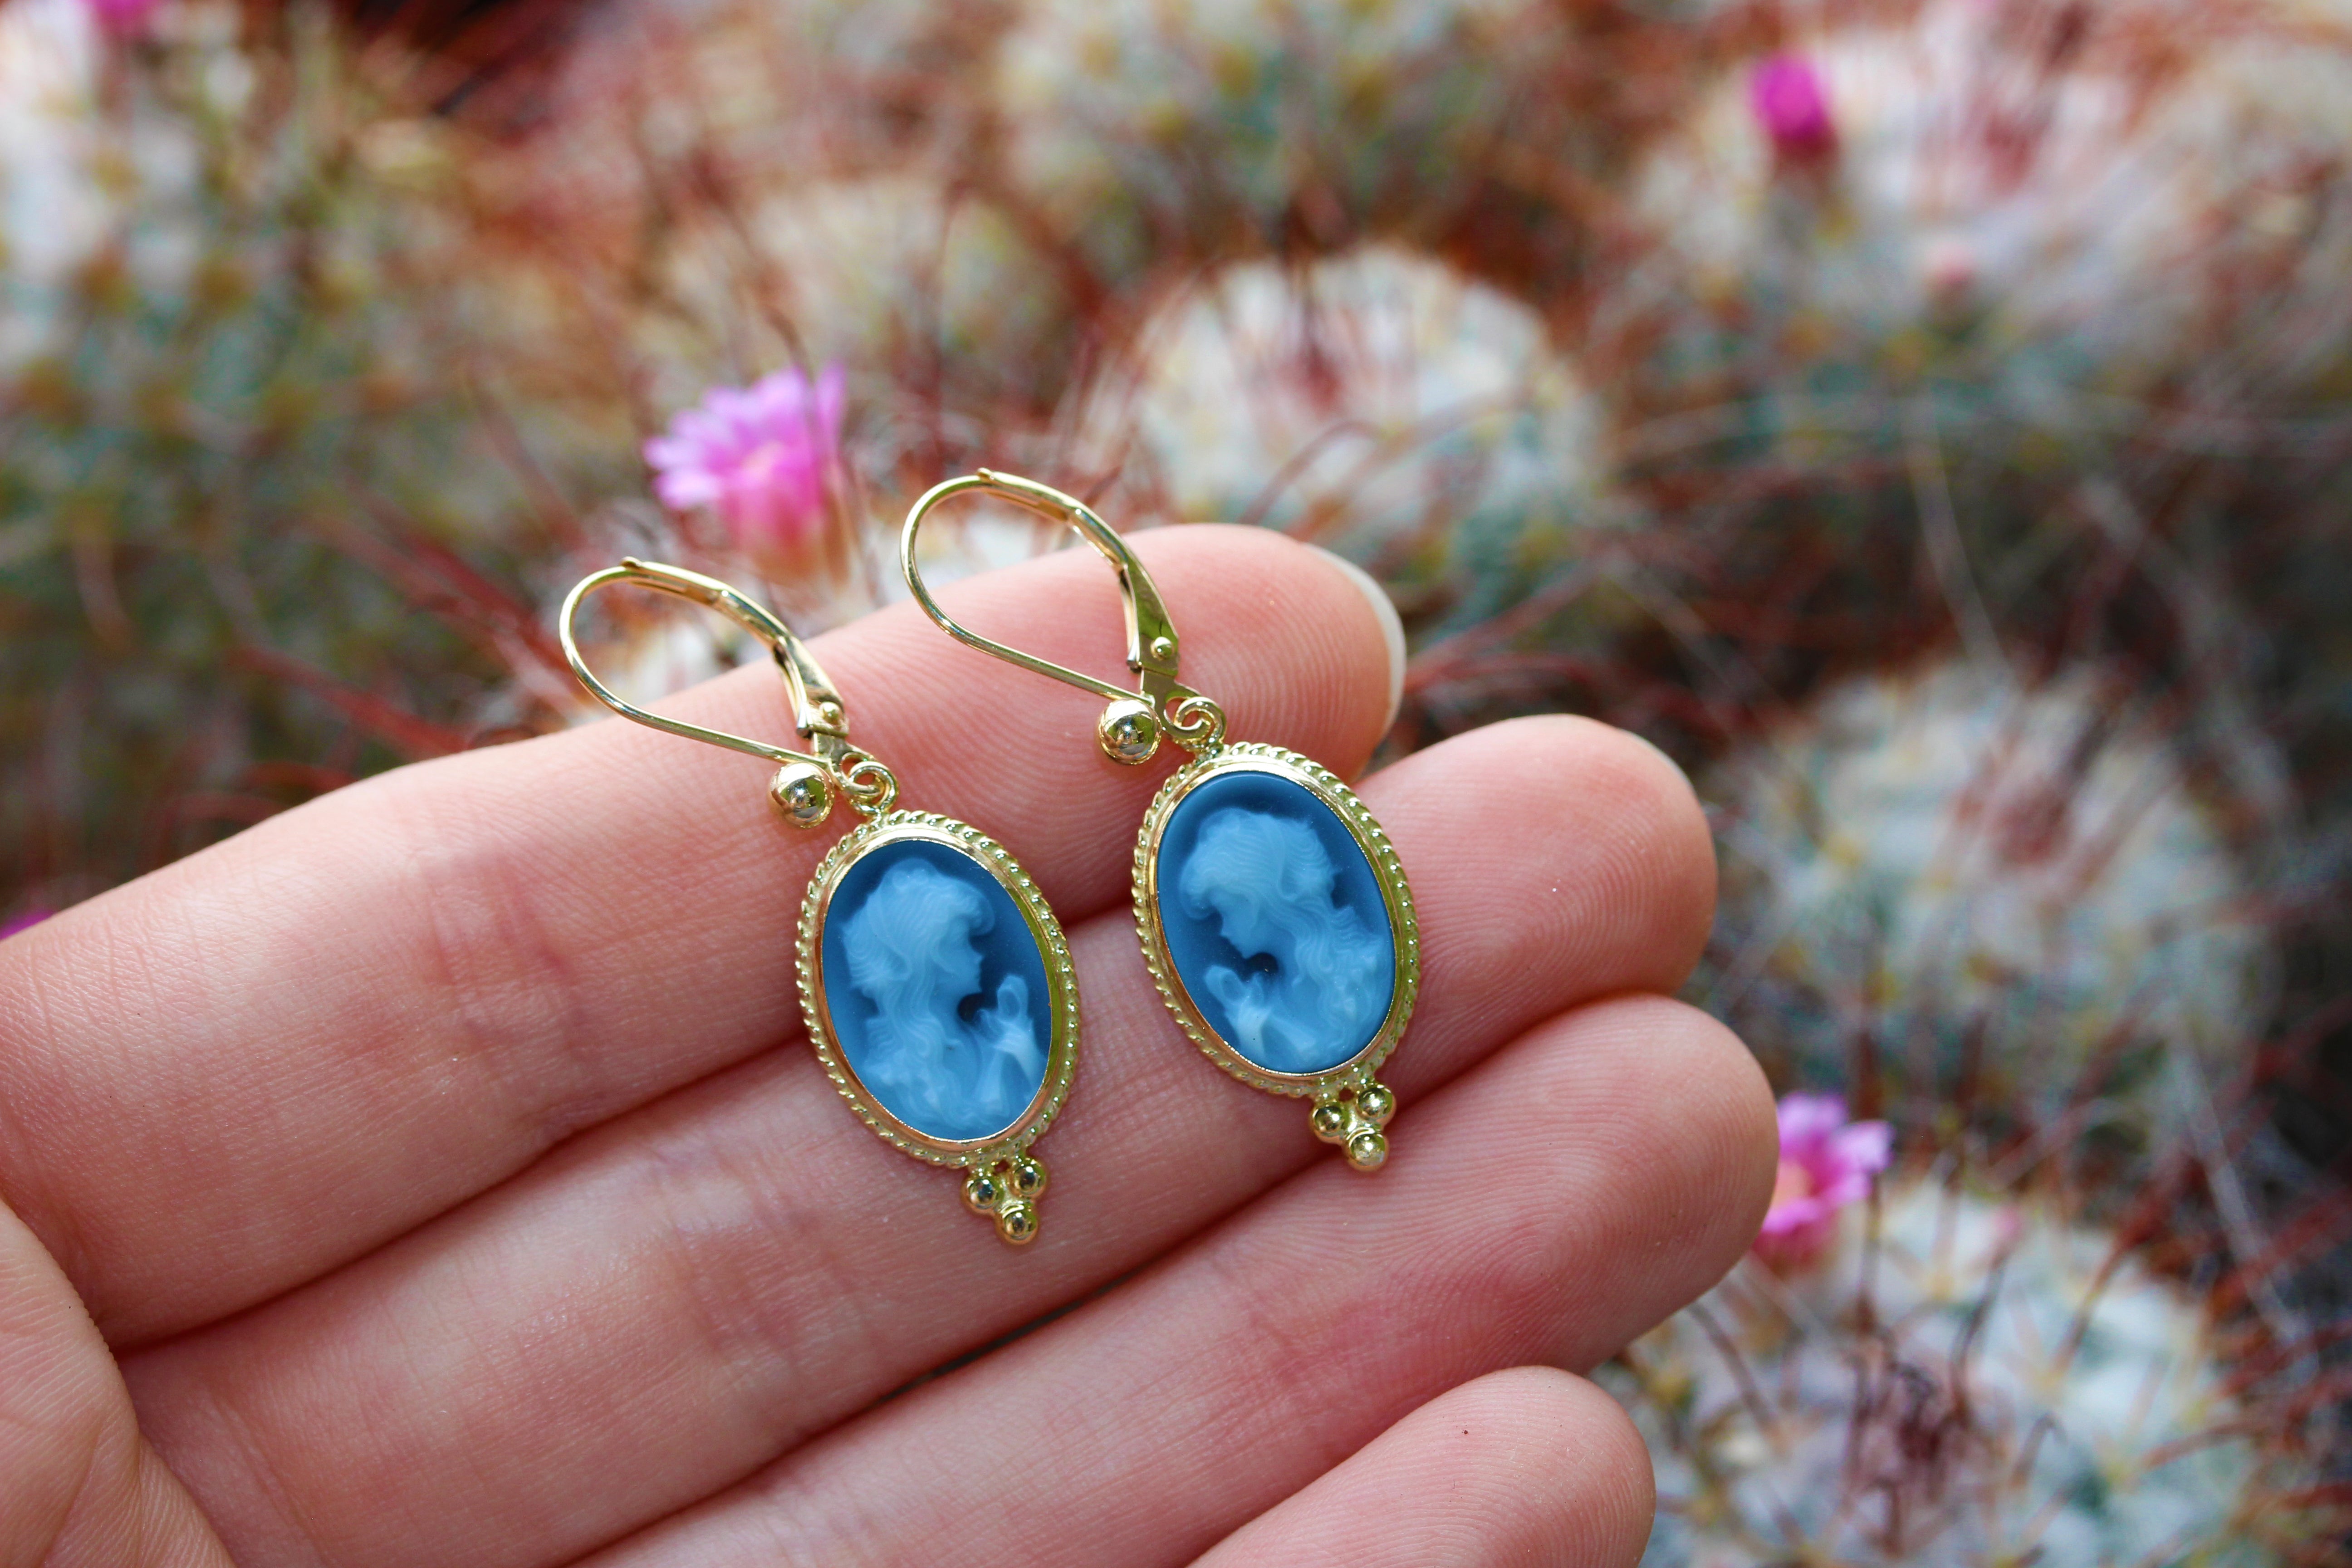 cameo earrings on hands with cactus background